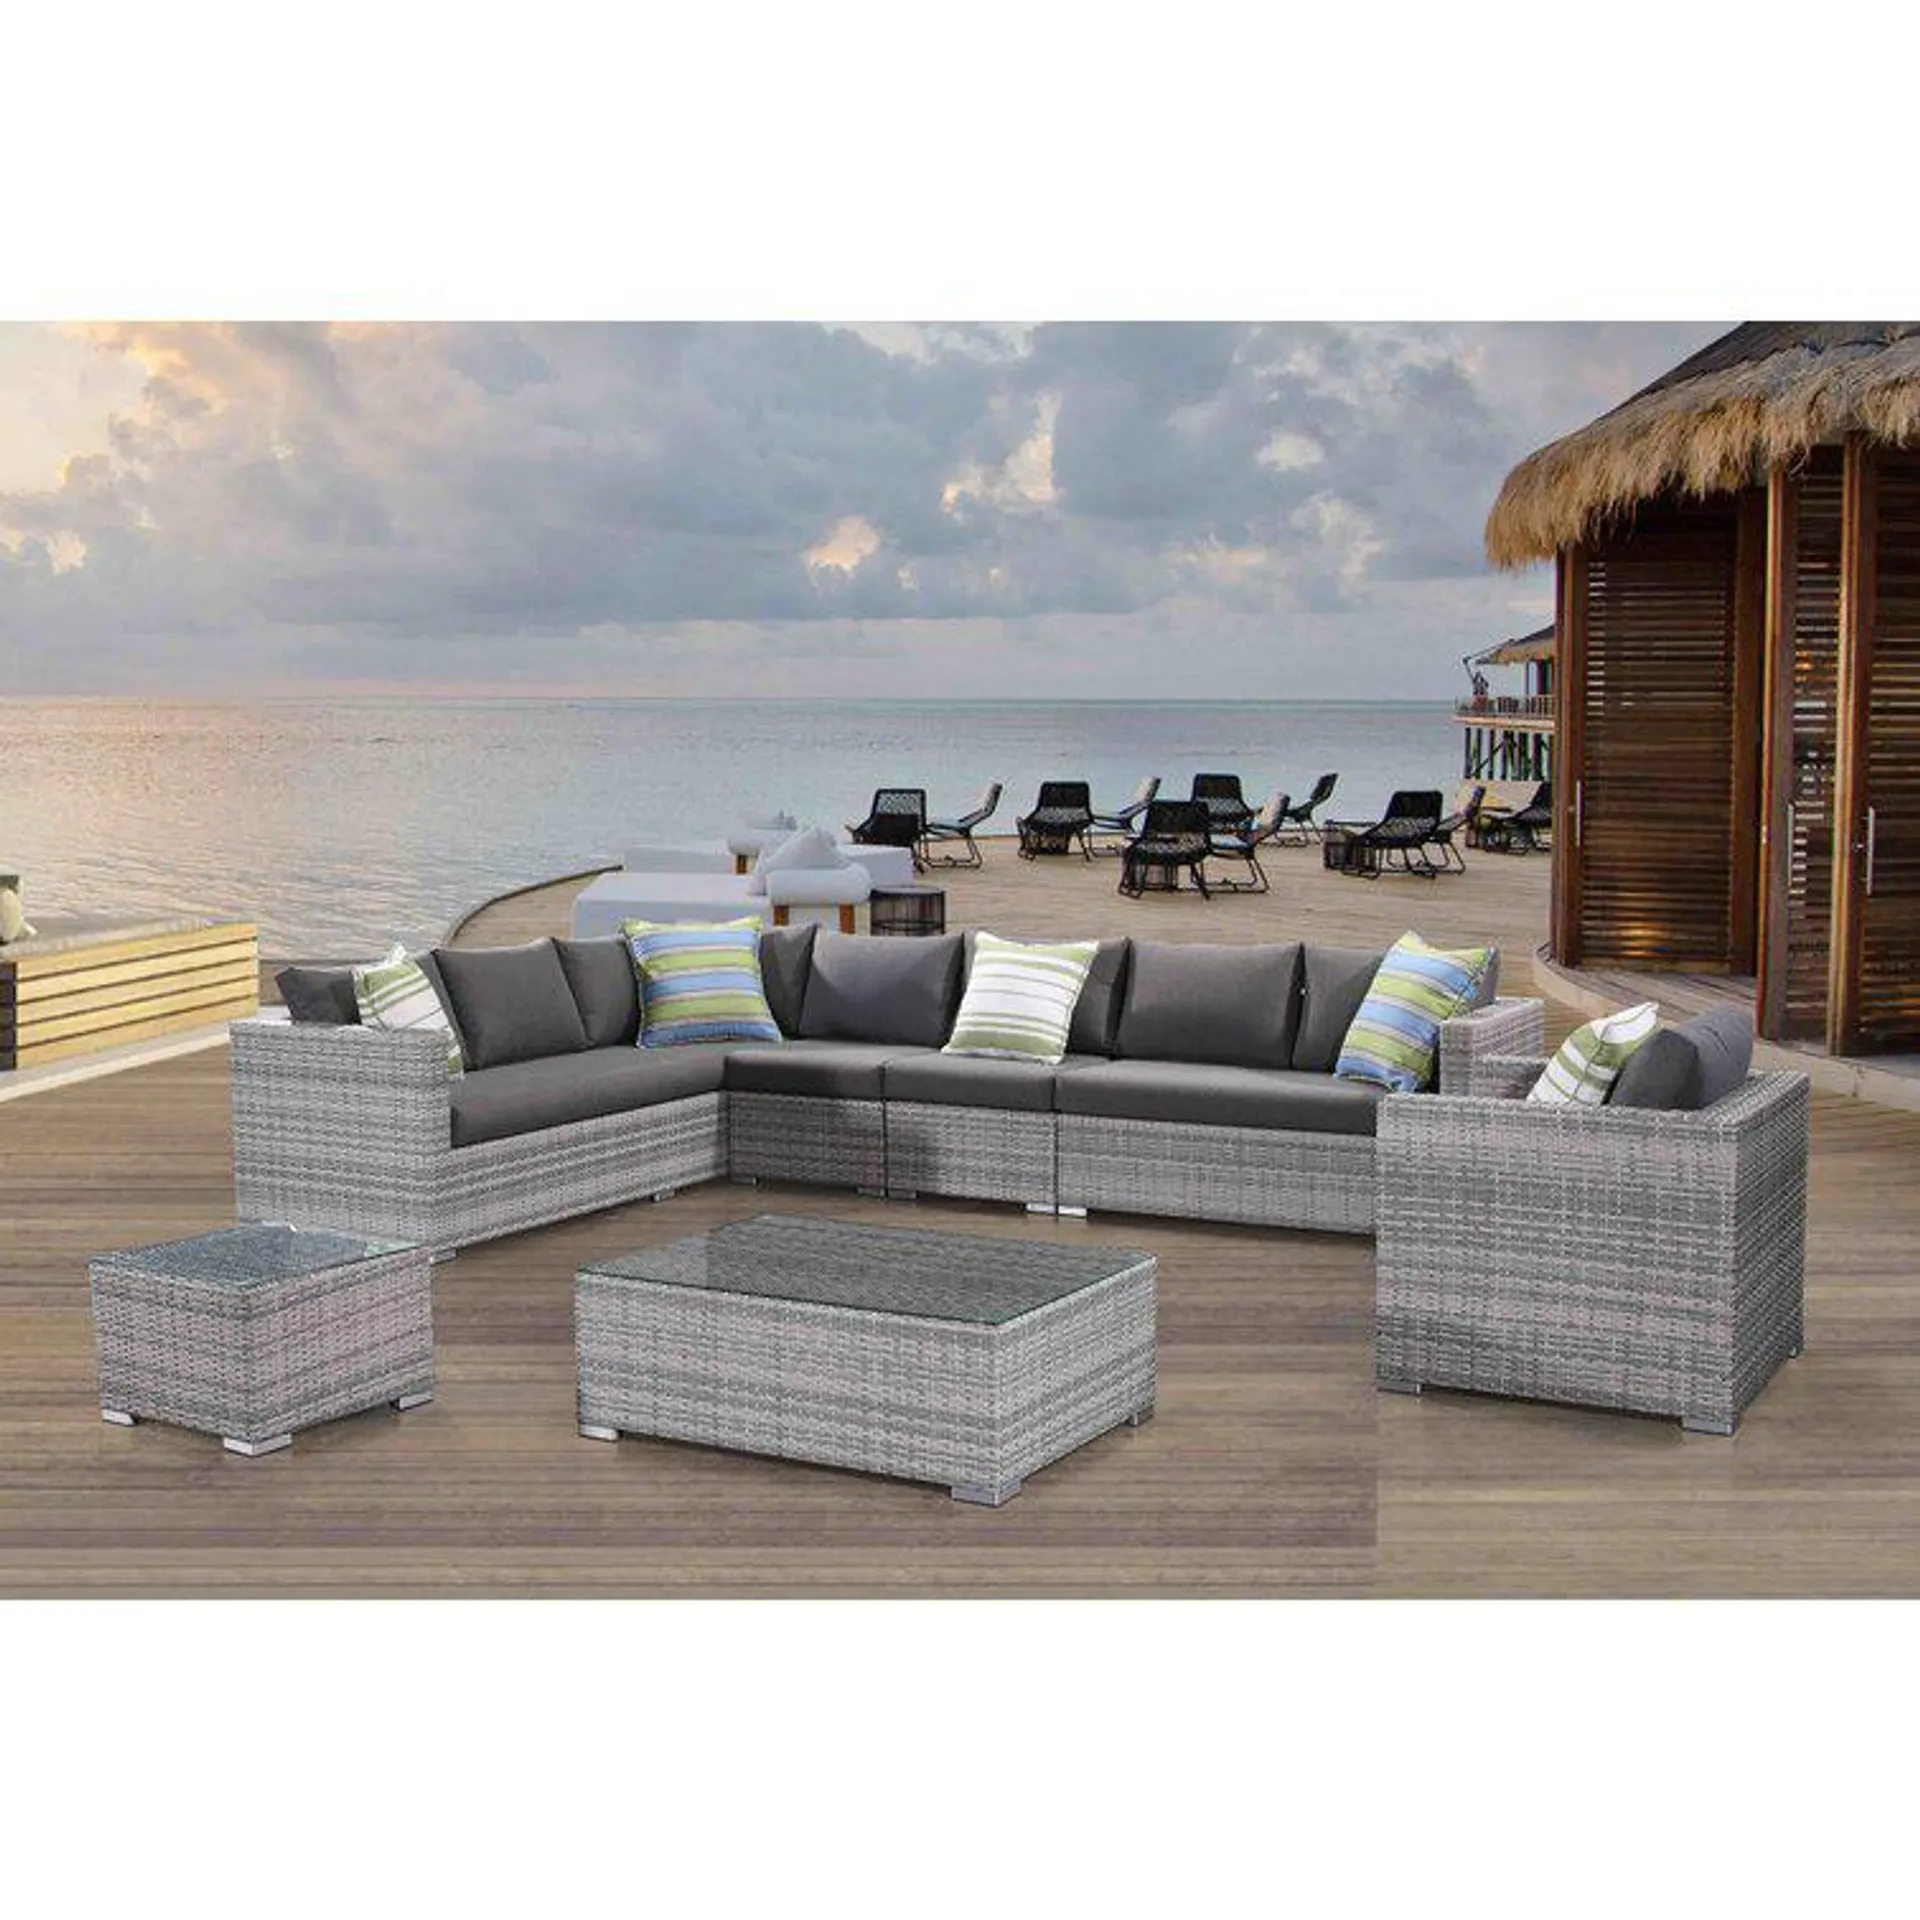 Grijalva 7 - Person Outdoor Seating Group with Cushions